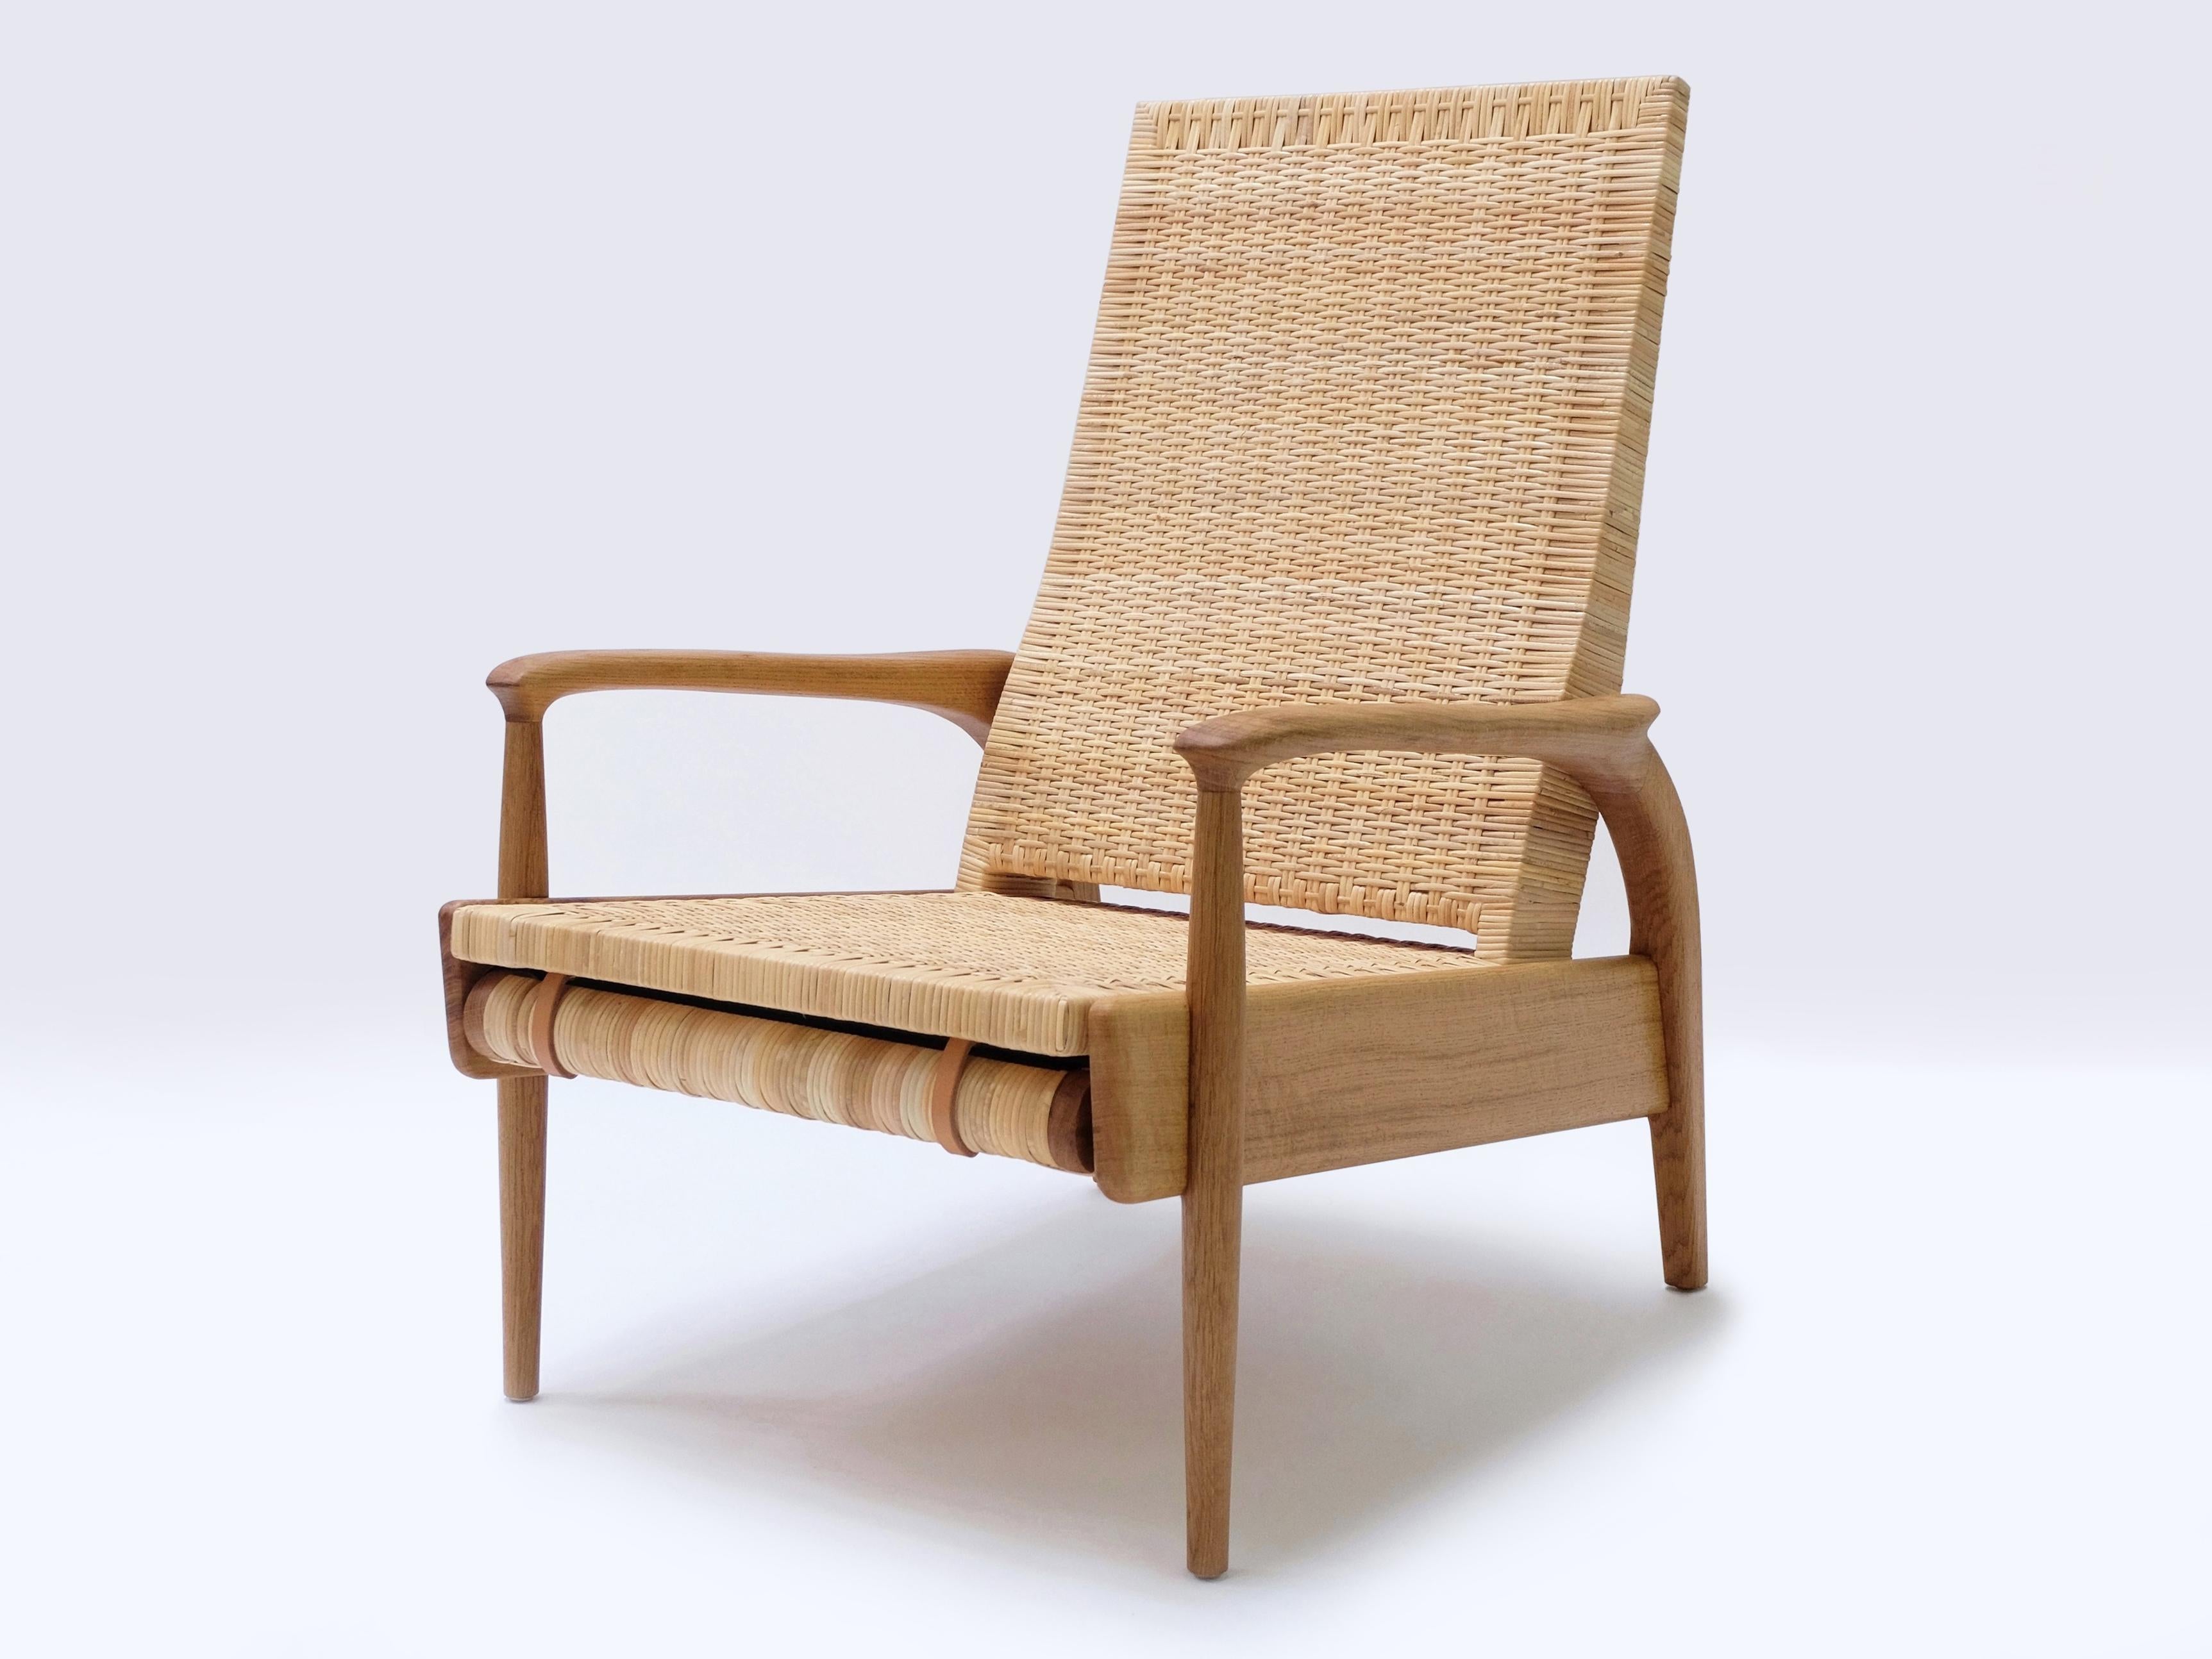 Custom-Made Handcrafted Reclining Eco Lounge Chair FENDRIK by Studio180degree
Shown in Sustainable Solid Natural Oiled Oak and Natural Undyed Cane

Noble - Tactile – Refined - Sustainable
Reclining Eco lounge chair FENDRIK is a noble Eco lounge